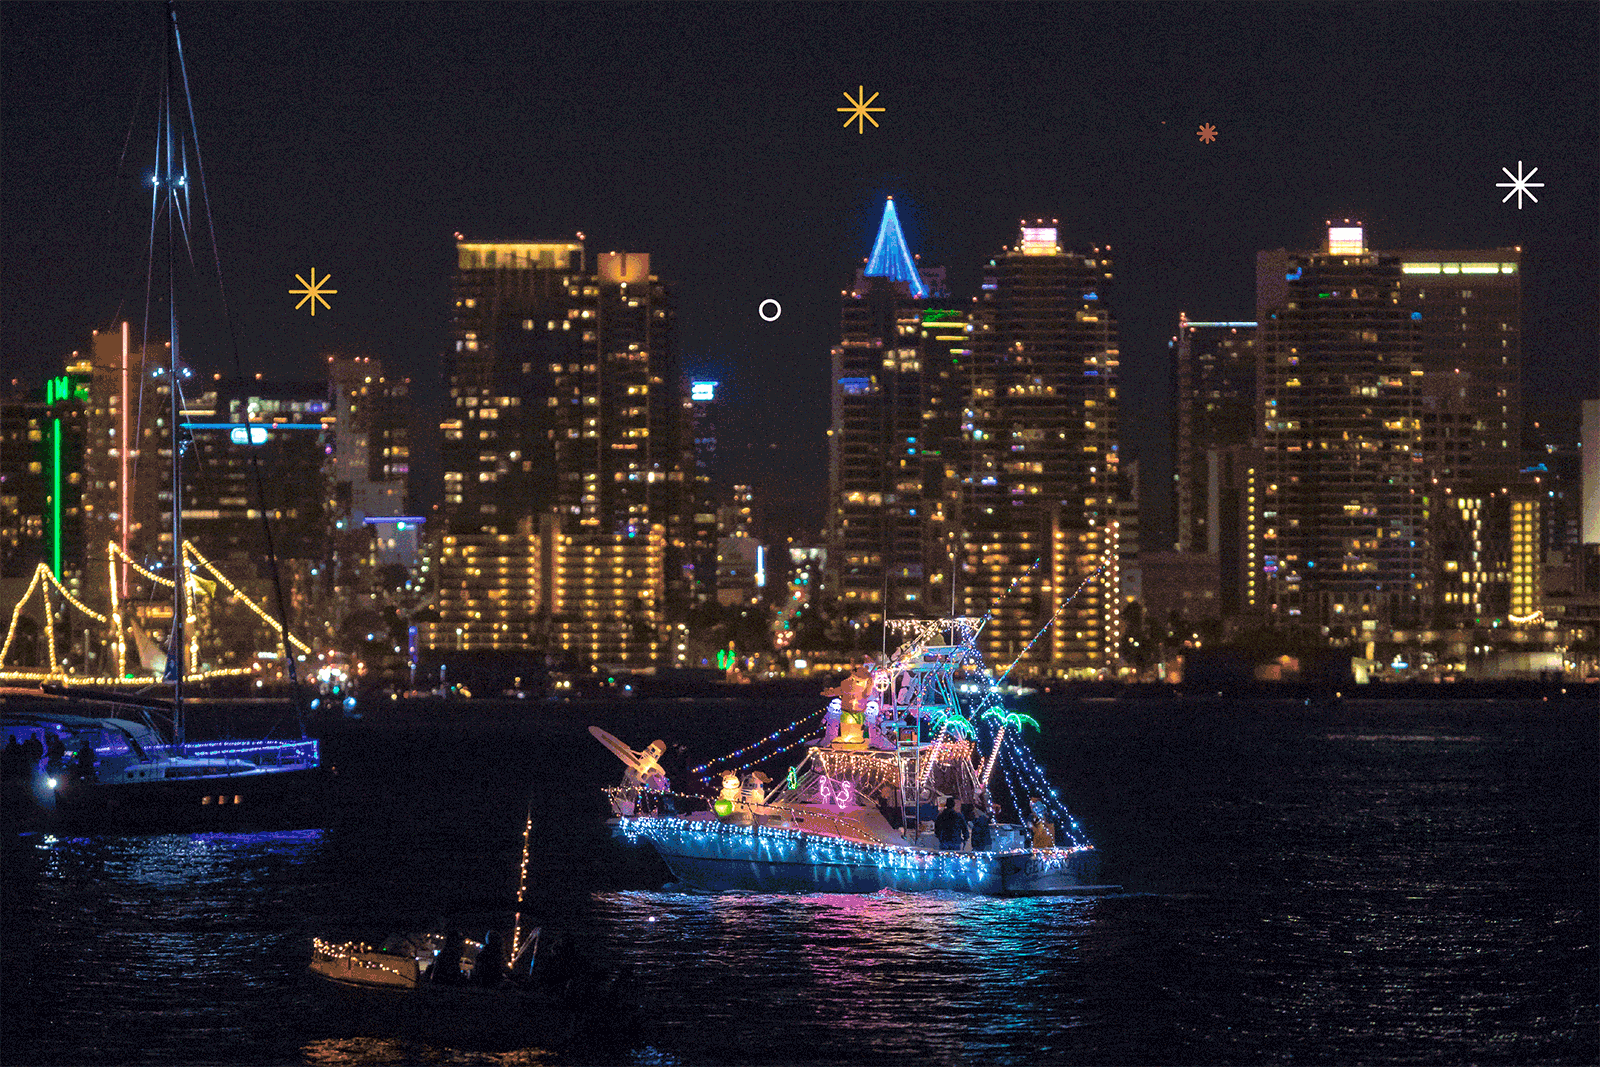 Sailboats, yachts and dinghies decorated with holiday lights sail in water with a cityscape in the background 